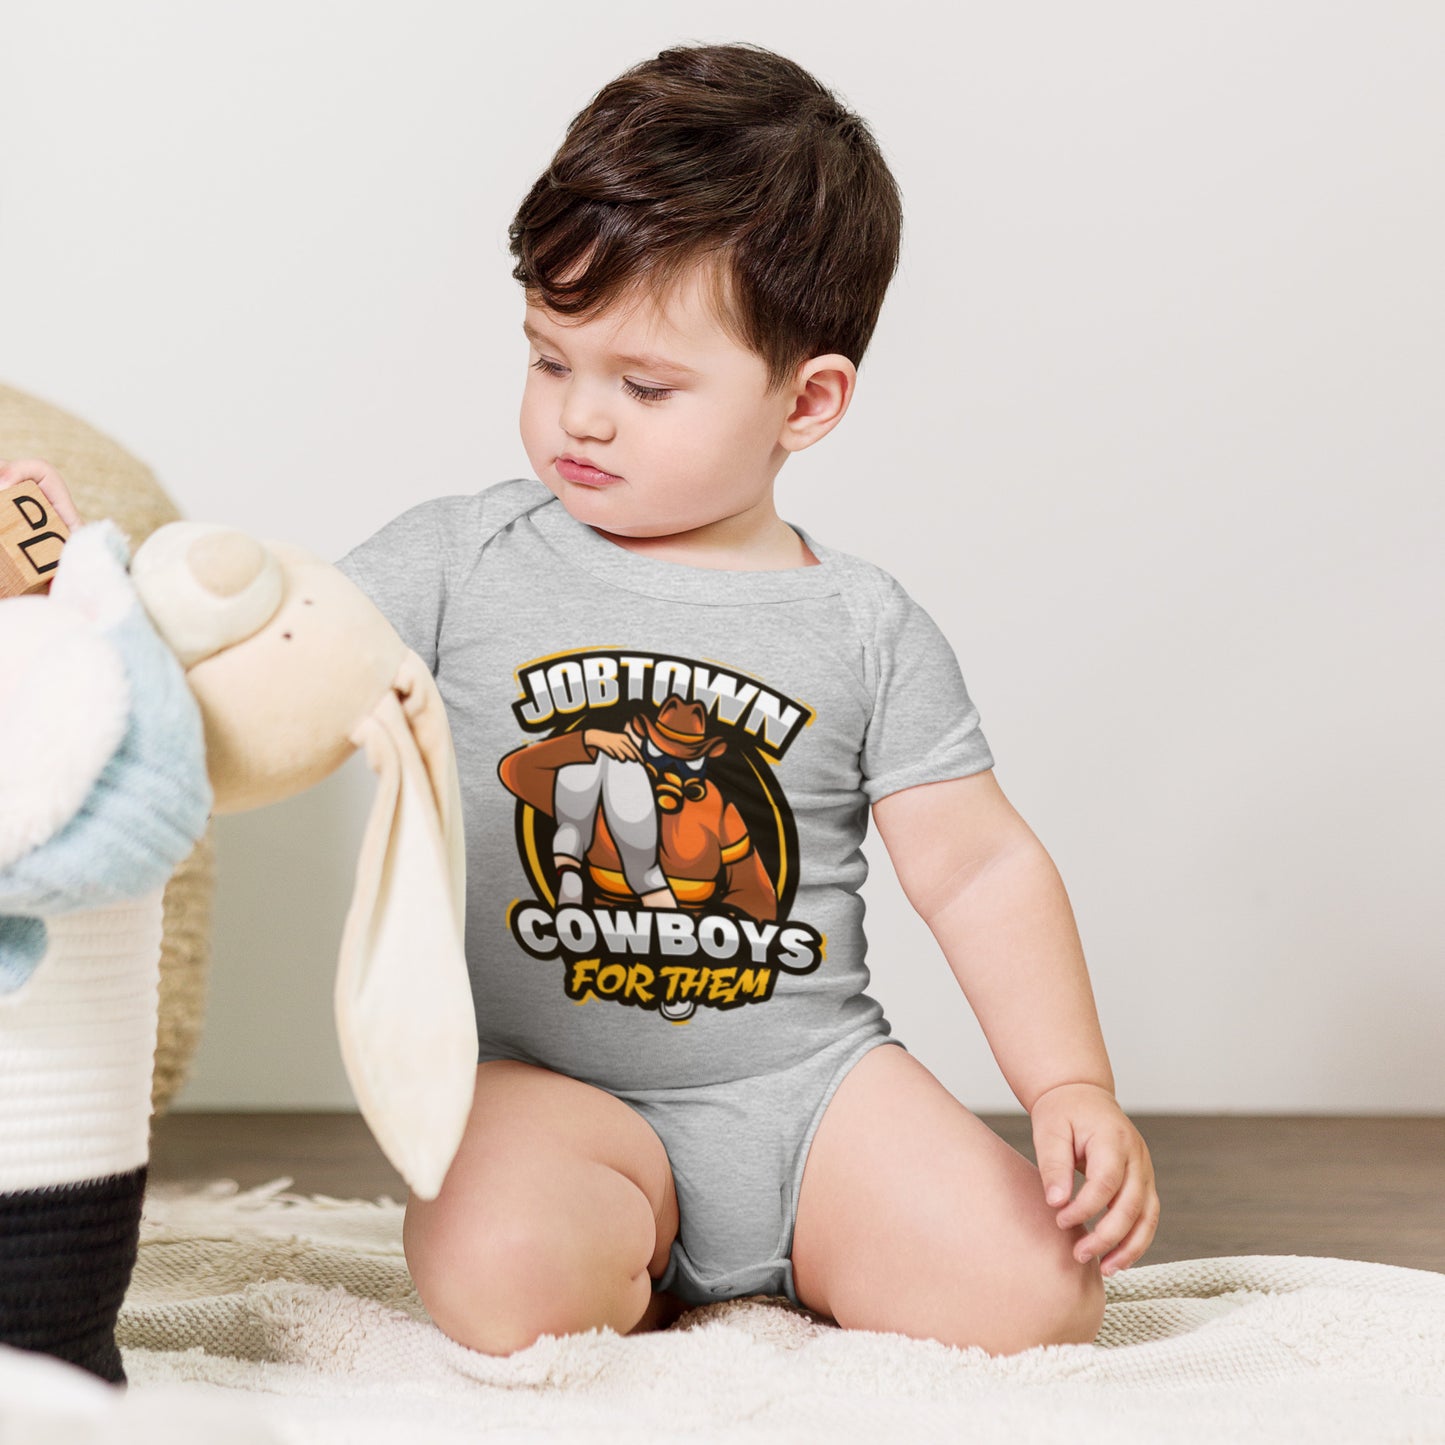 Jobtown Cowboys Firefighter- For Them Baby short sleeve one piece